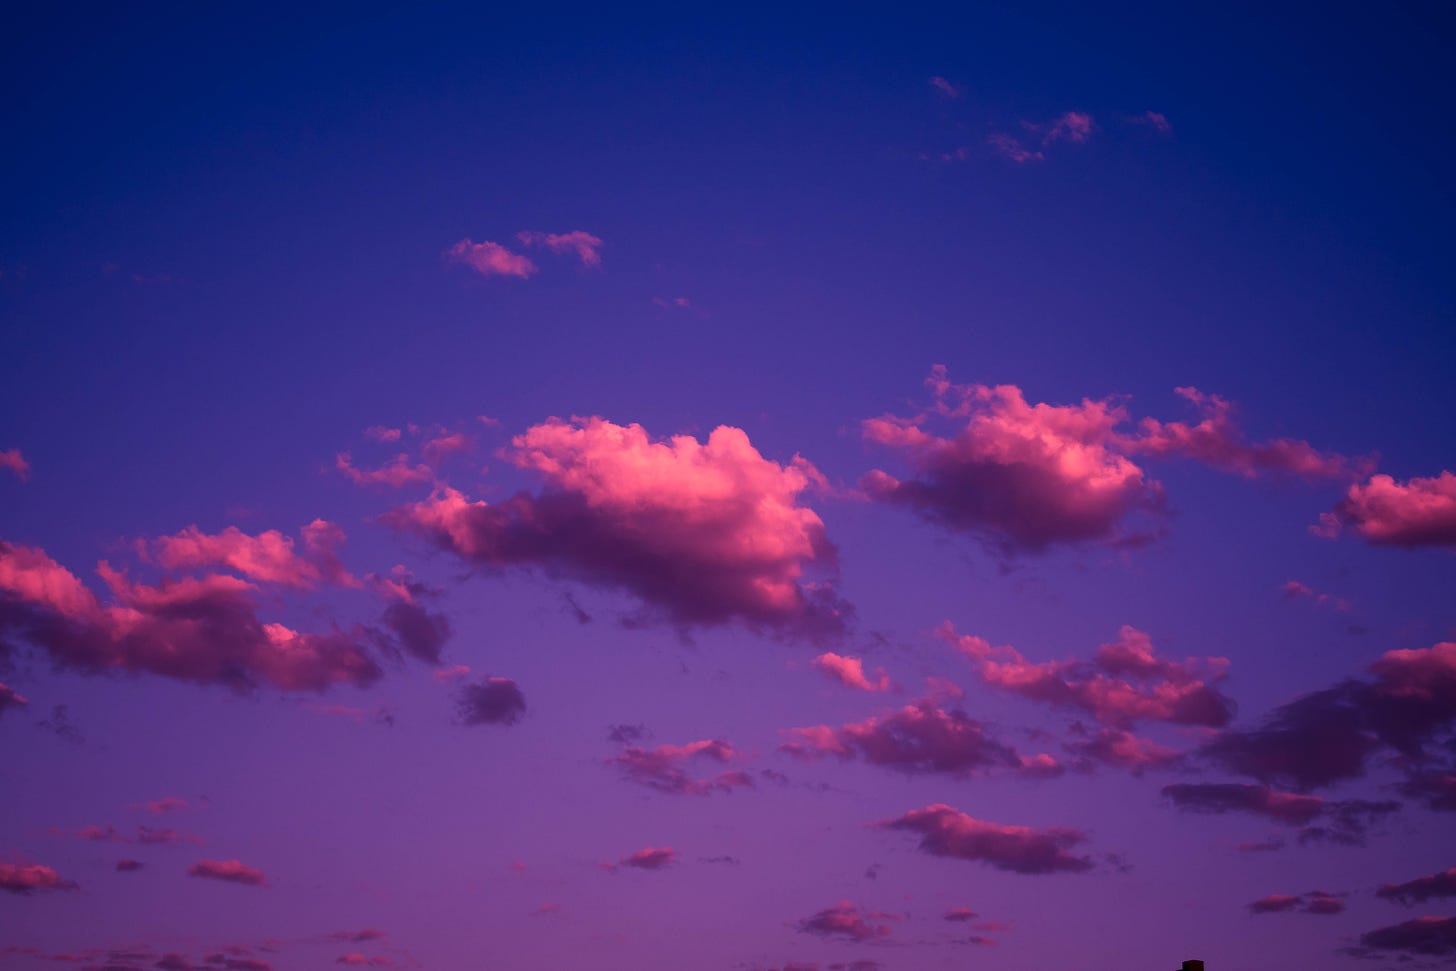 A different vibrant sky shading from blue to violet, crossed by a train of happy little pink clouds.